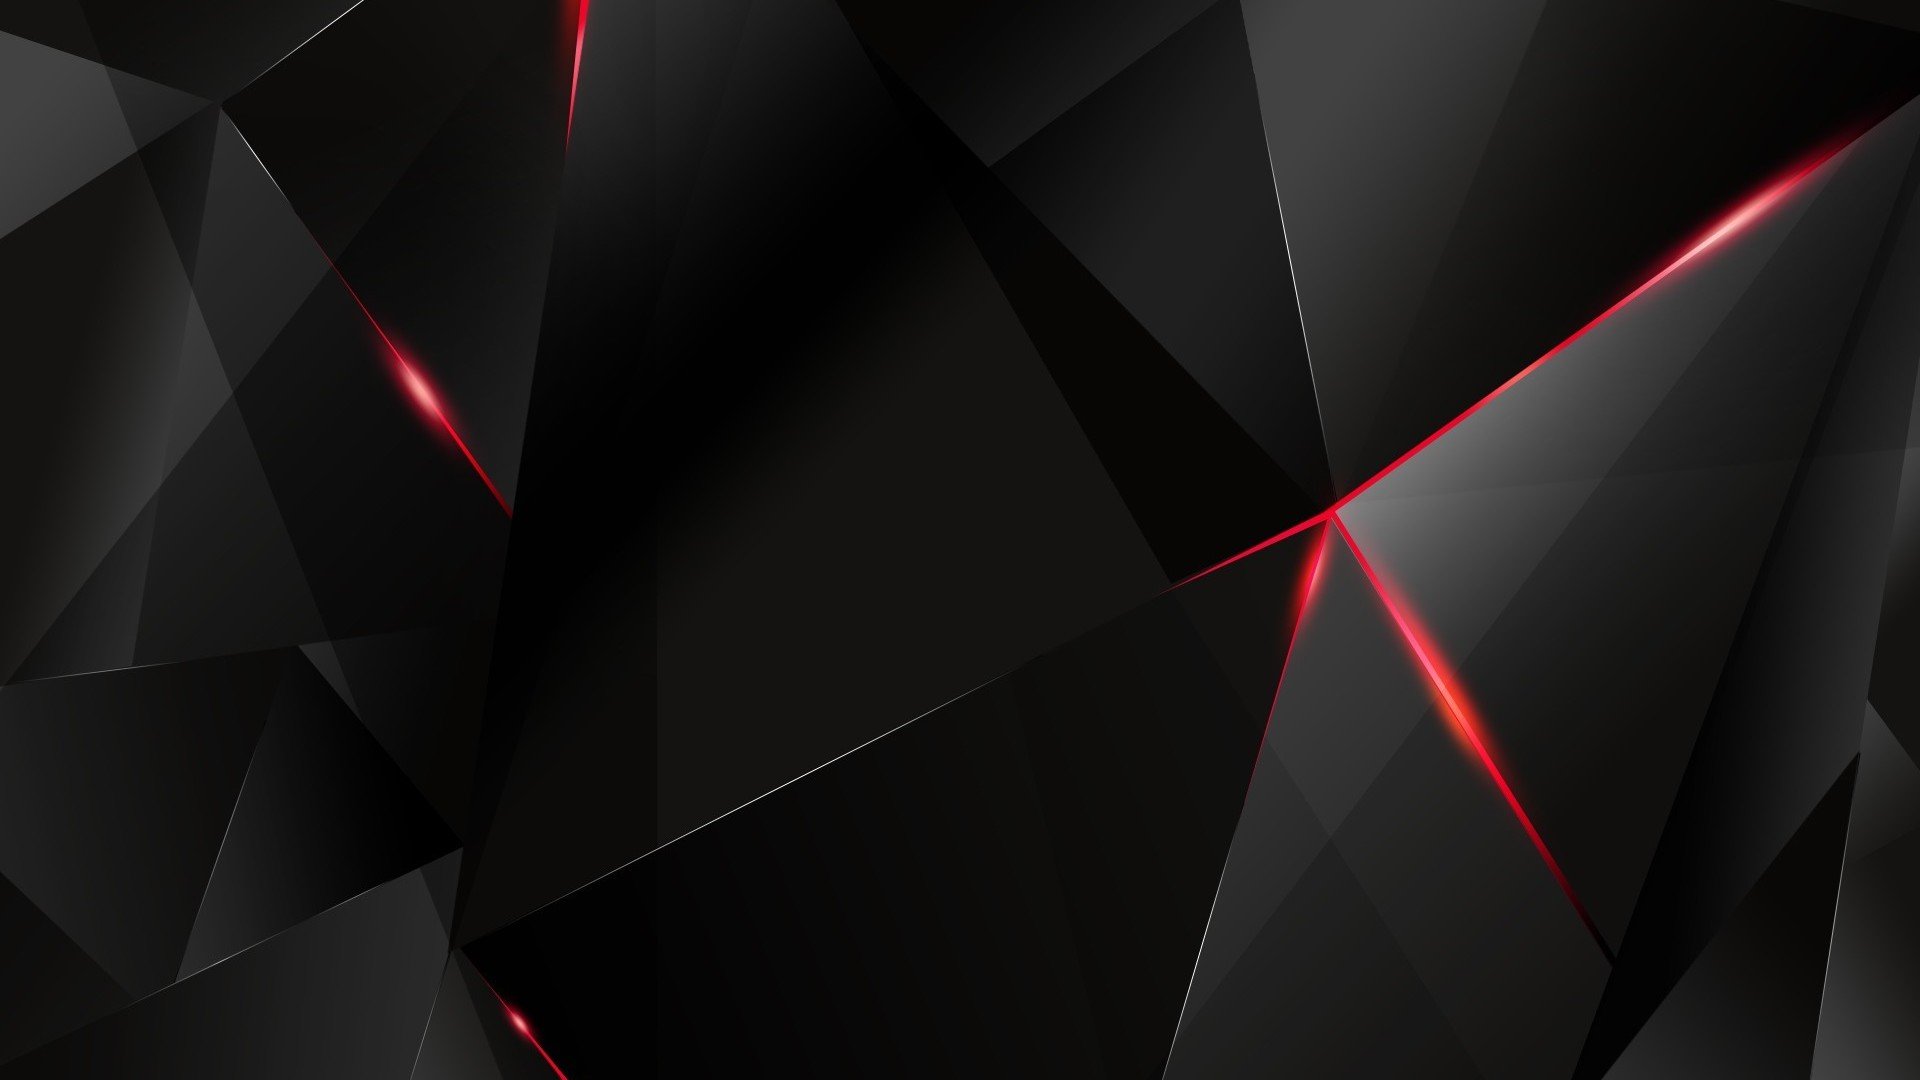 Black polygon with red edges abstract hd wallpaper 1920x1080 120